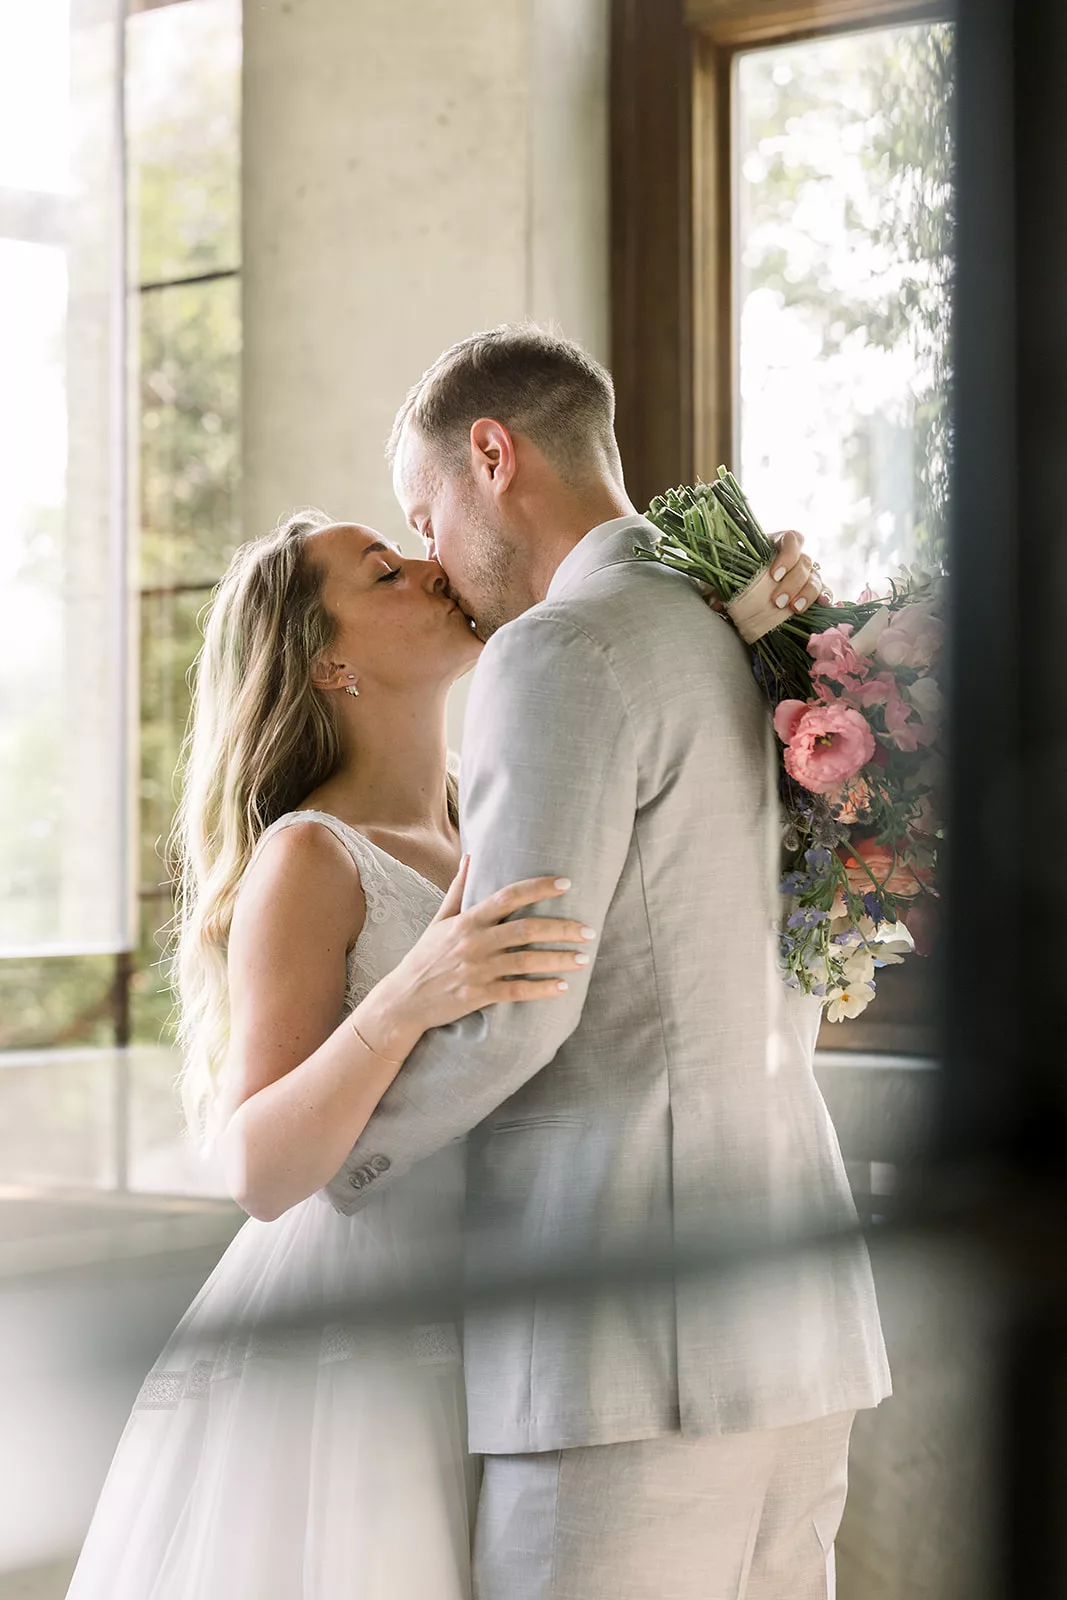 Newlyweds kiss in front of a mirror in a grey suit and lace dress